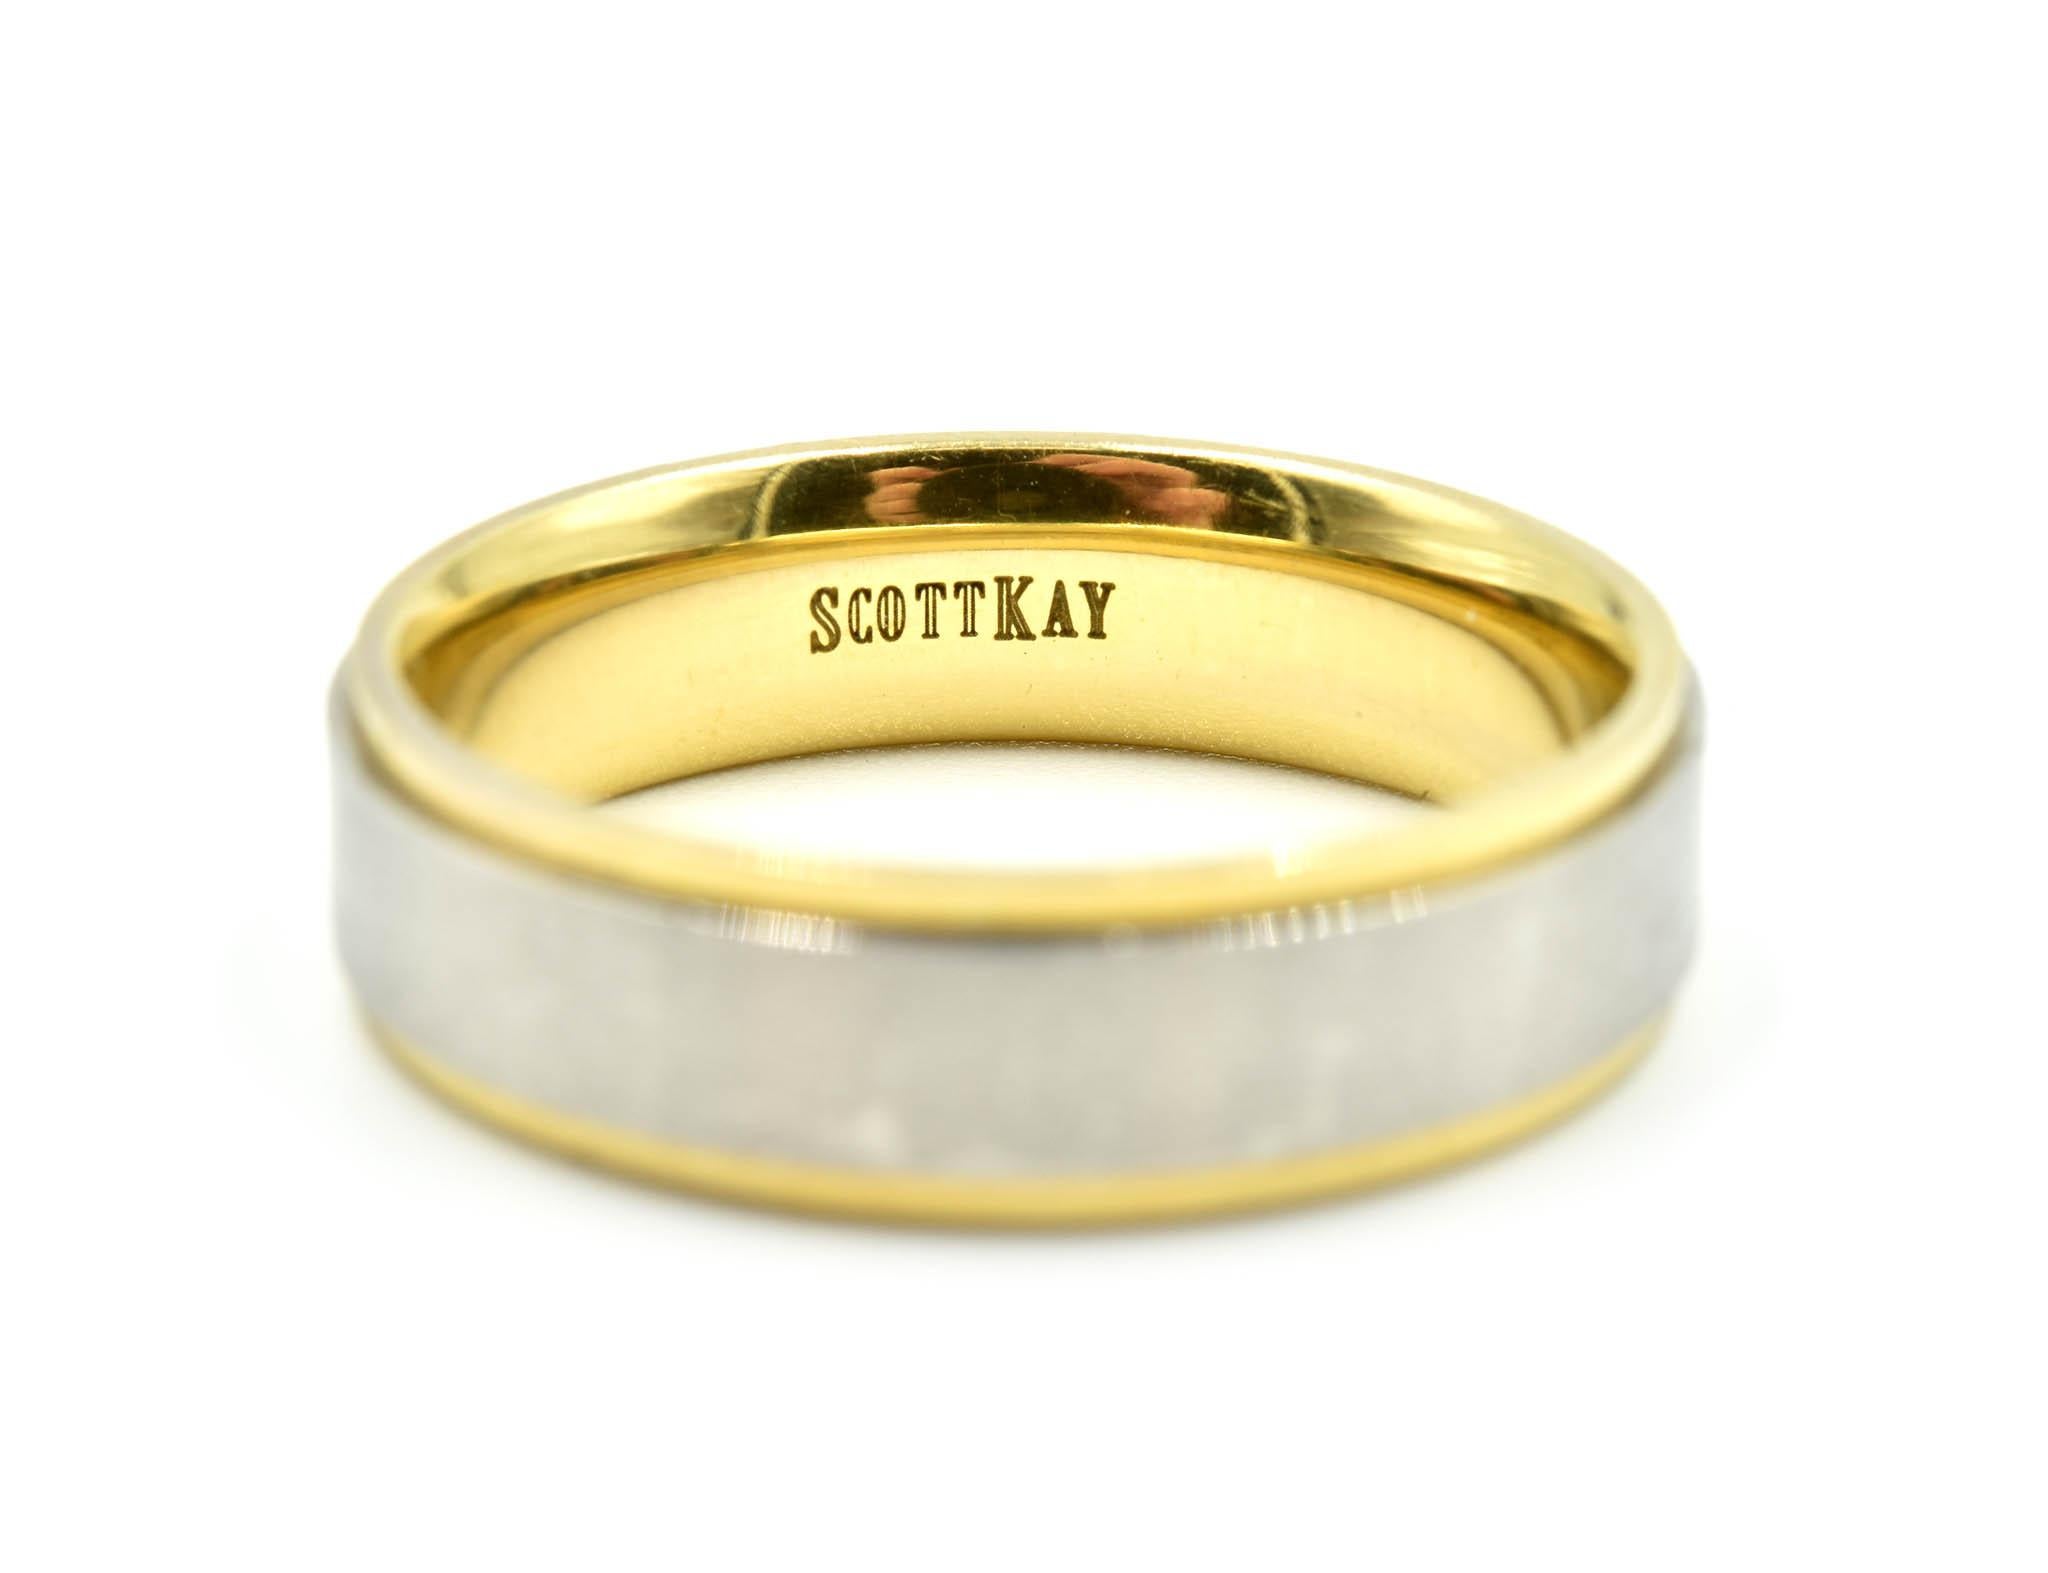 This is a Gent’s Scott Kay wedding band made in a 2-tone design with 19k yellow gold and PD950 palladium. This wedding band from Scott Kay would be a fantastic way to start a happily-ever-after marriage. Band size is 10 and the shank measures 6.01mm